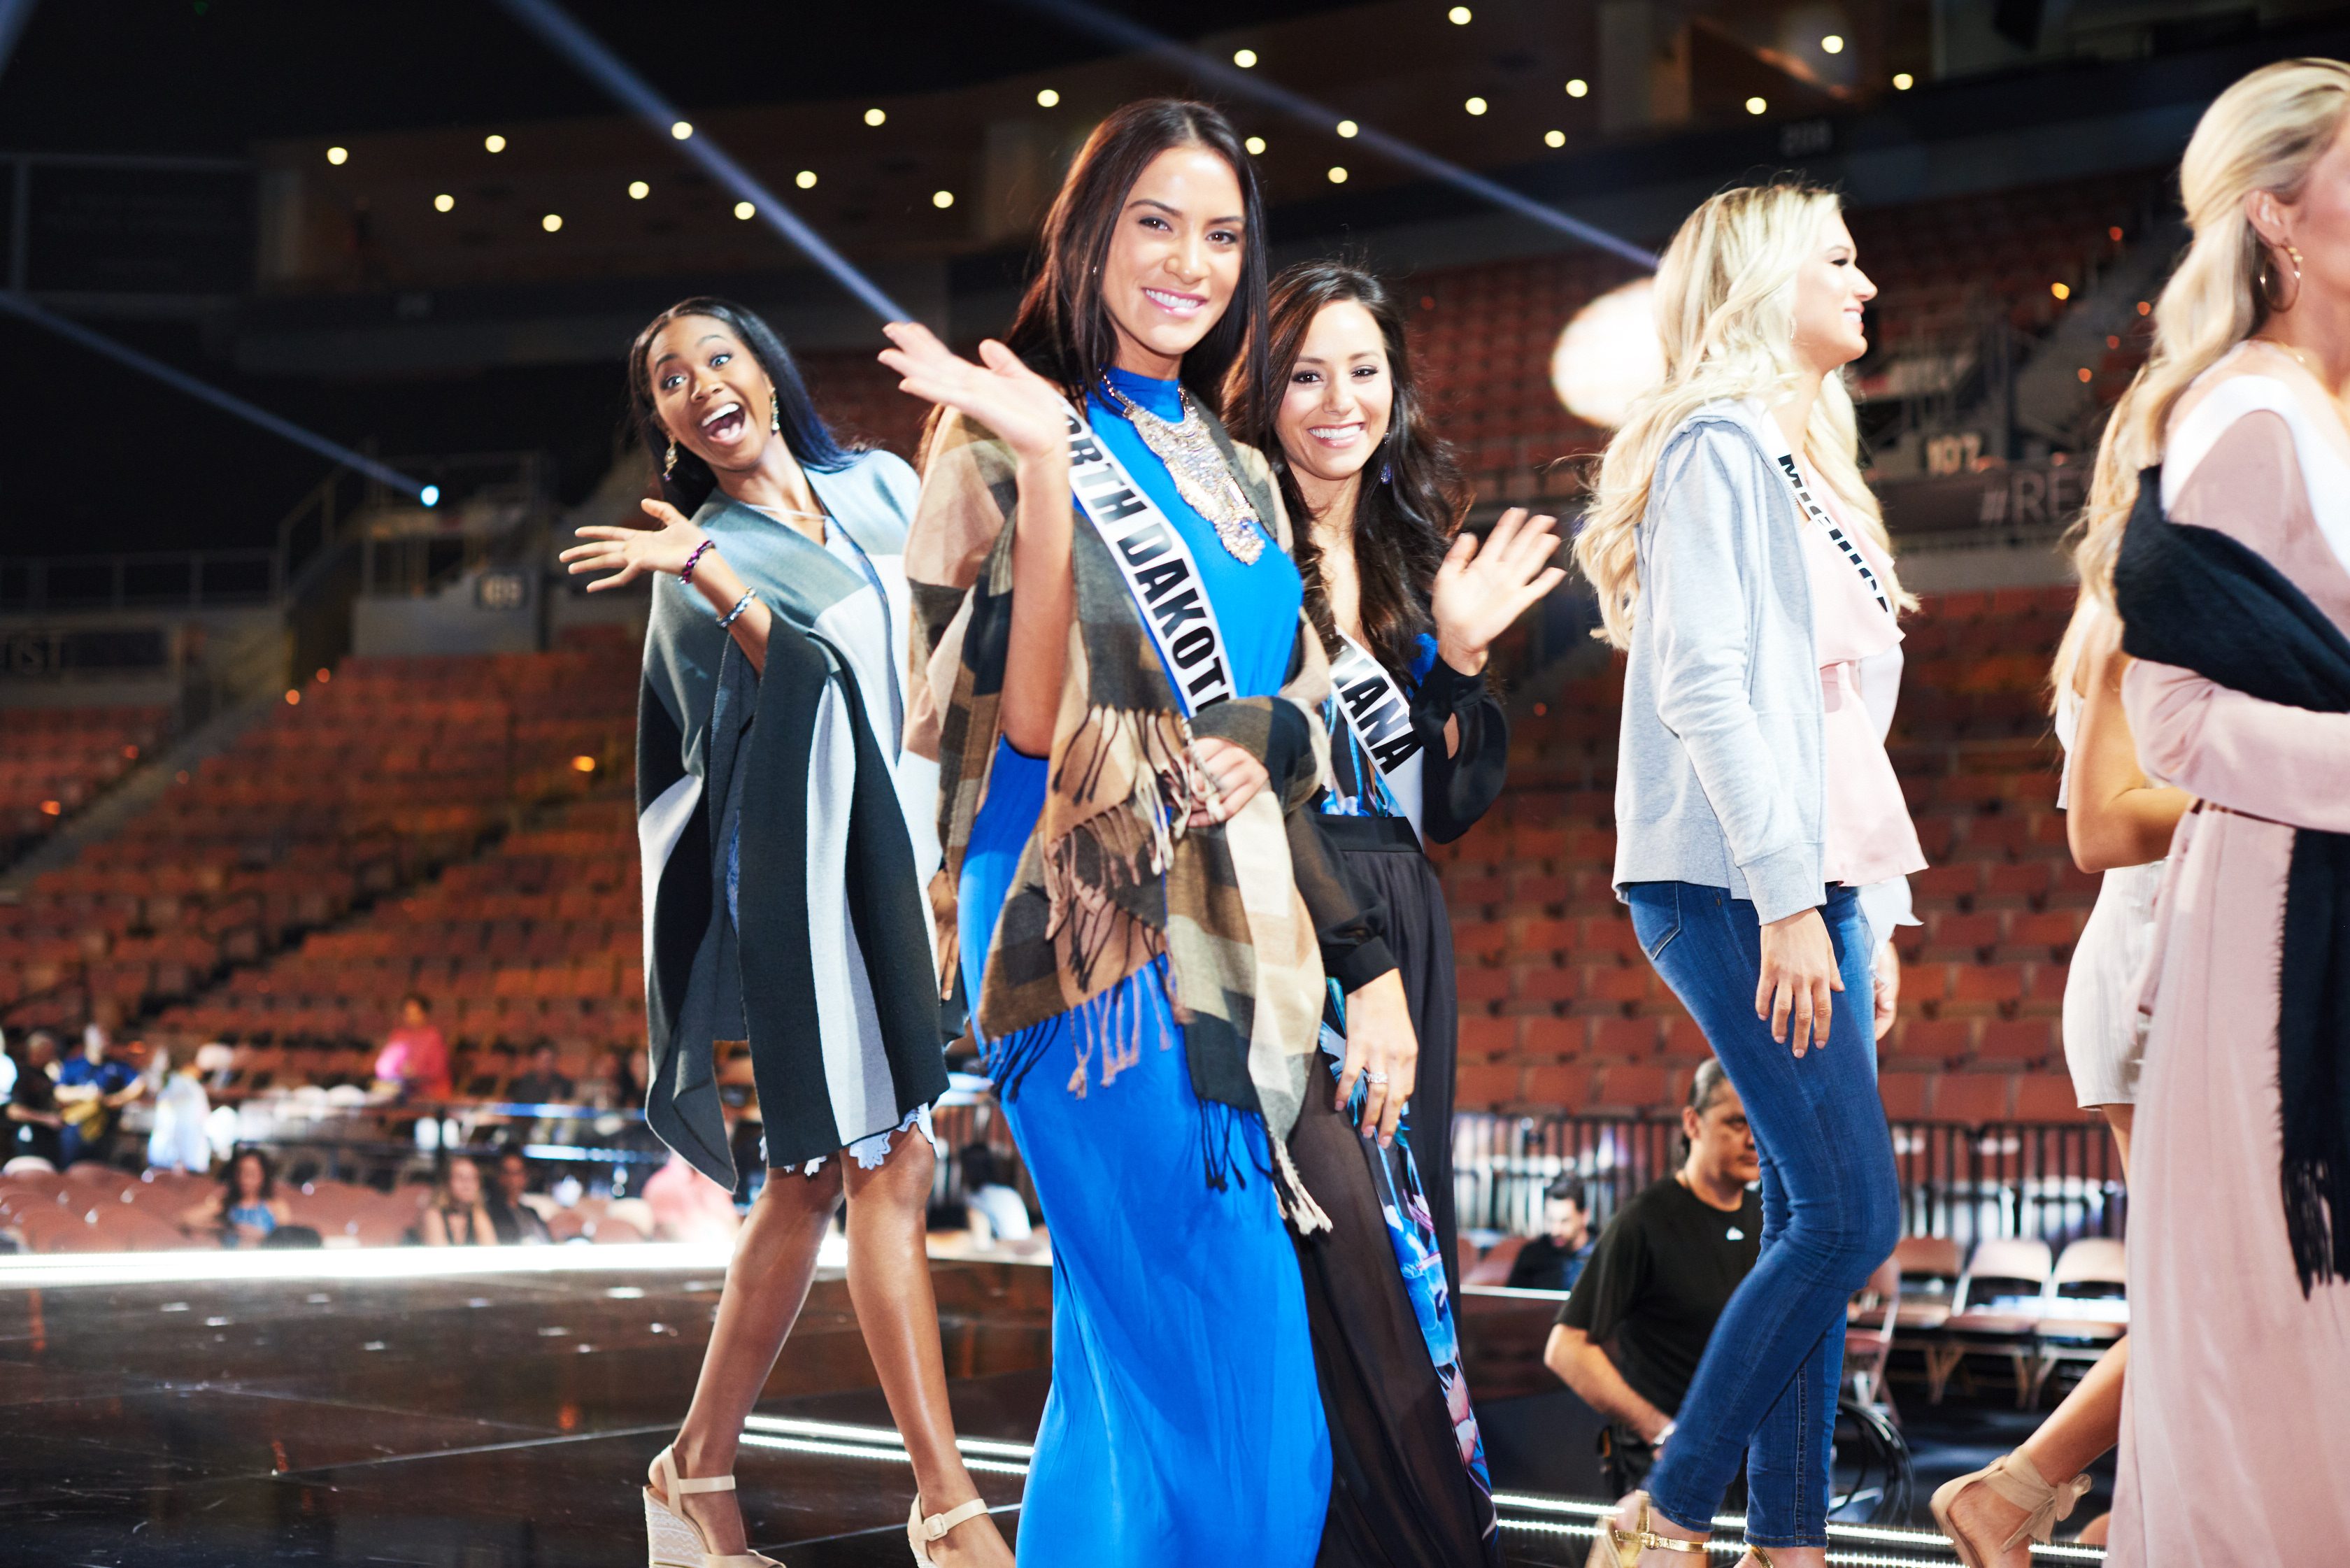 REHEARSALS. Bayleigh Dayton, Miss Missouri USA 2017; Raquel Wellentin, Miss North Dakota USA 2017; and Brittany Winchester, Miss Indiana USA 2017; on stage during rehearsal at Mandalay Bay Resort and Casino on May 13, 2017. Photo courtesy of HO/The Miss Universe Organization  